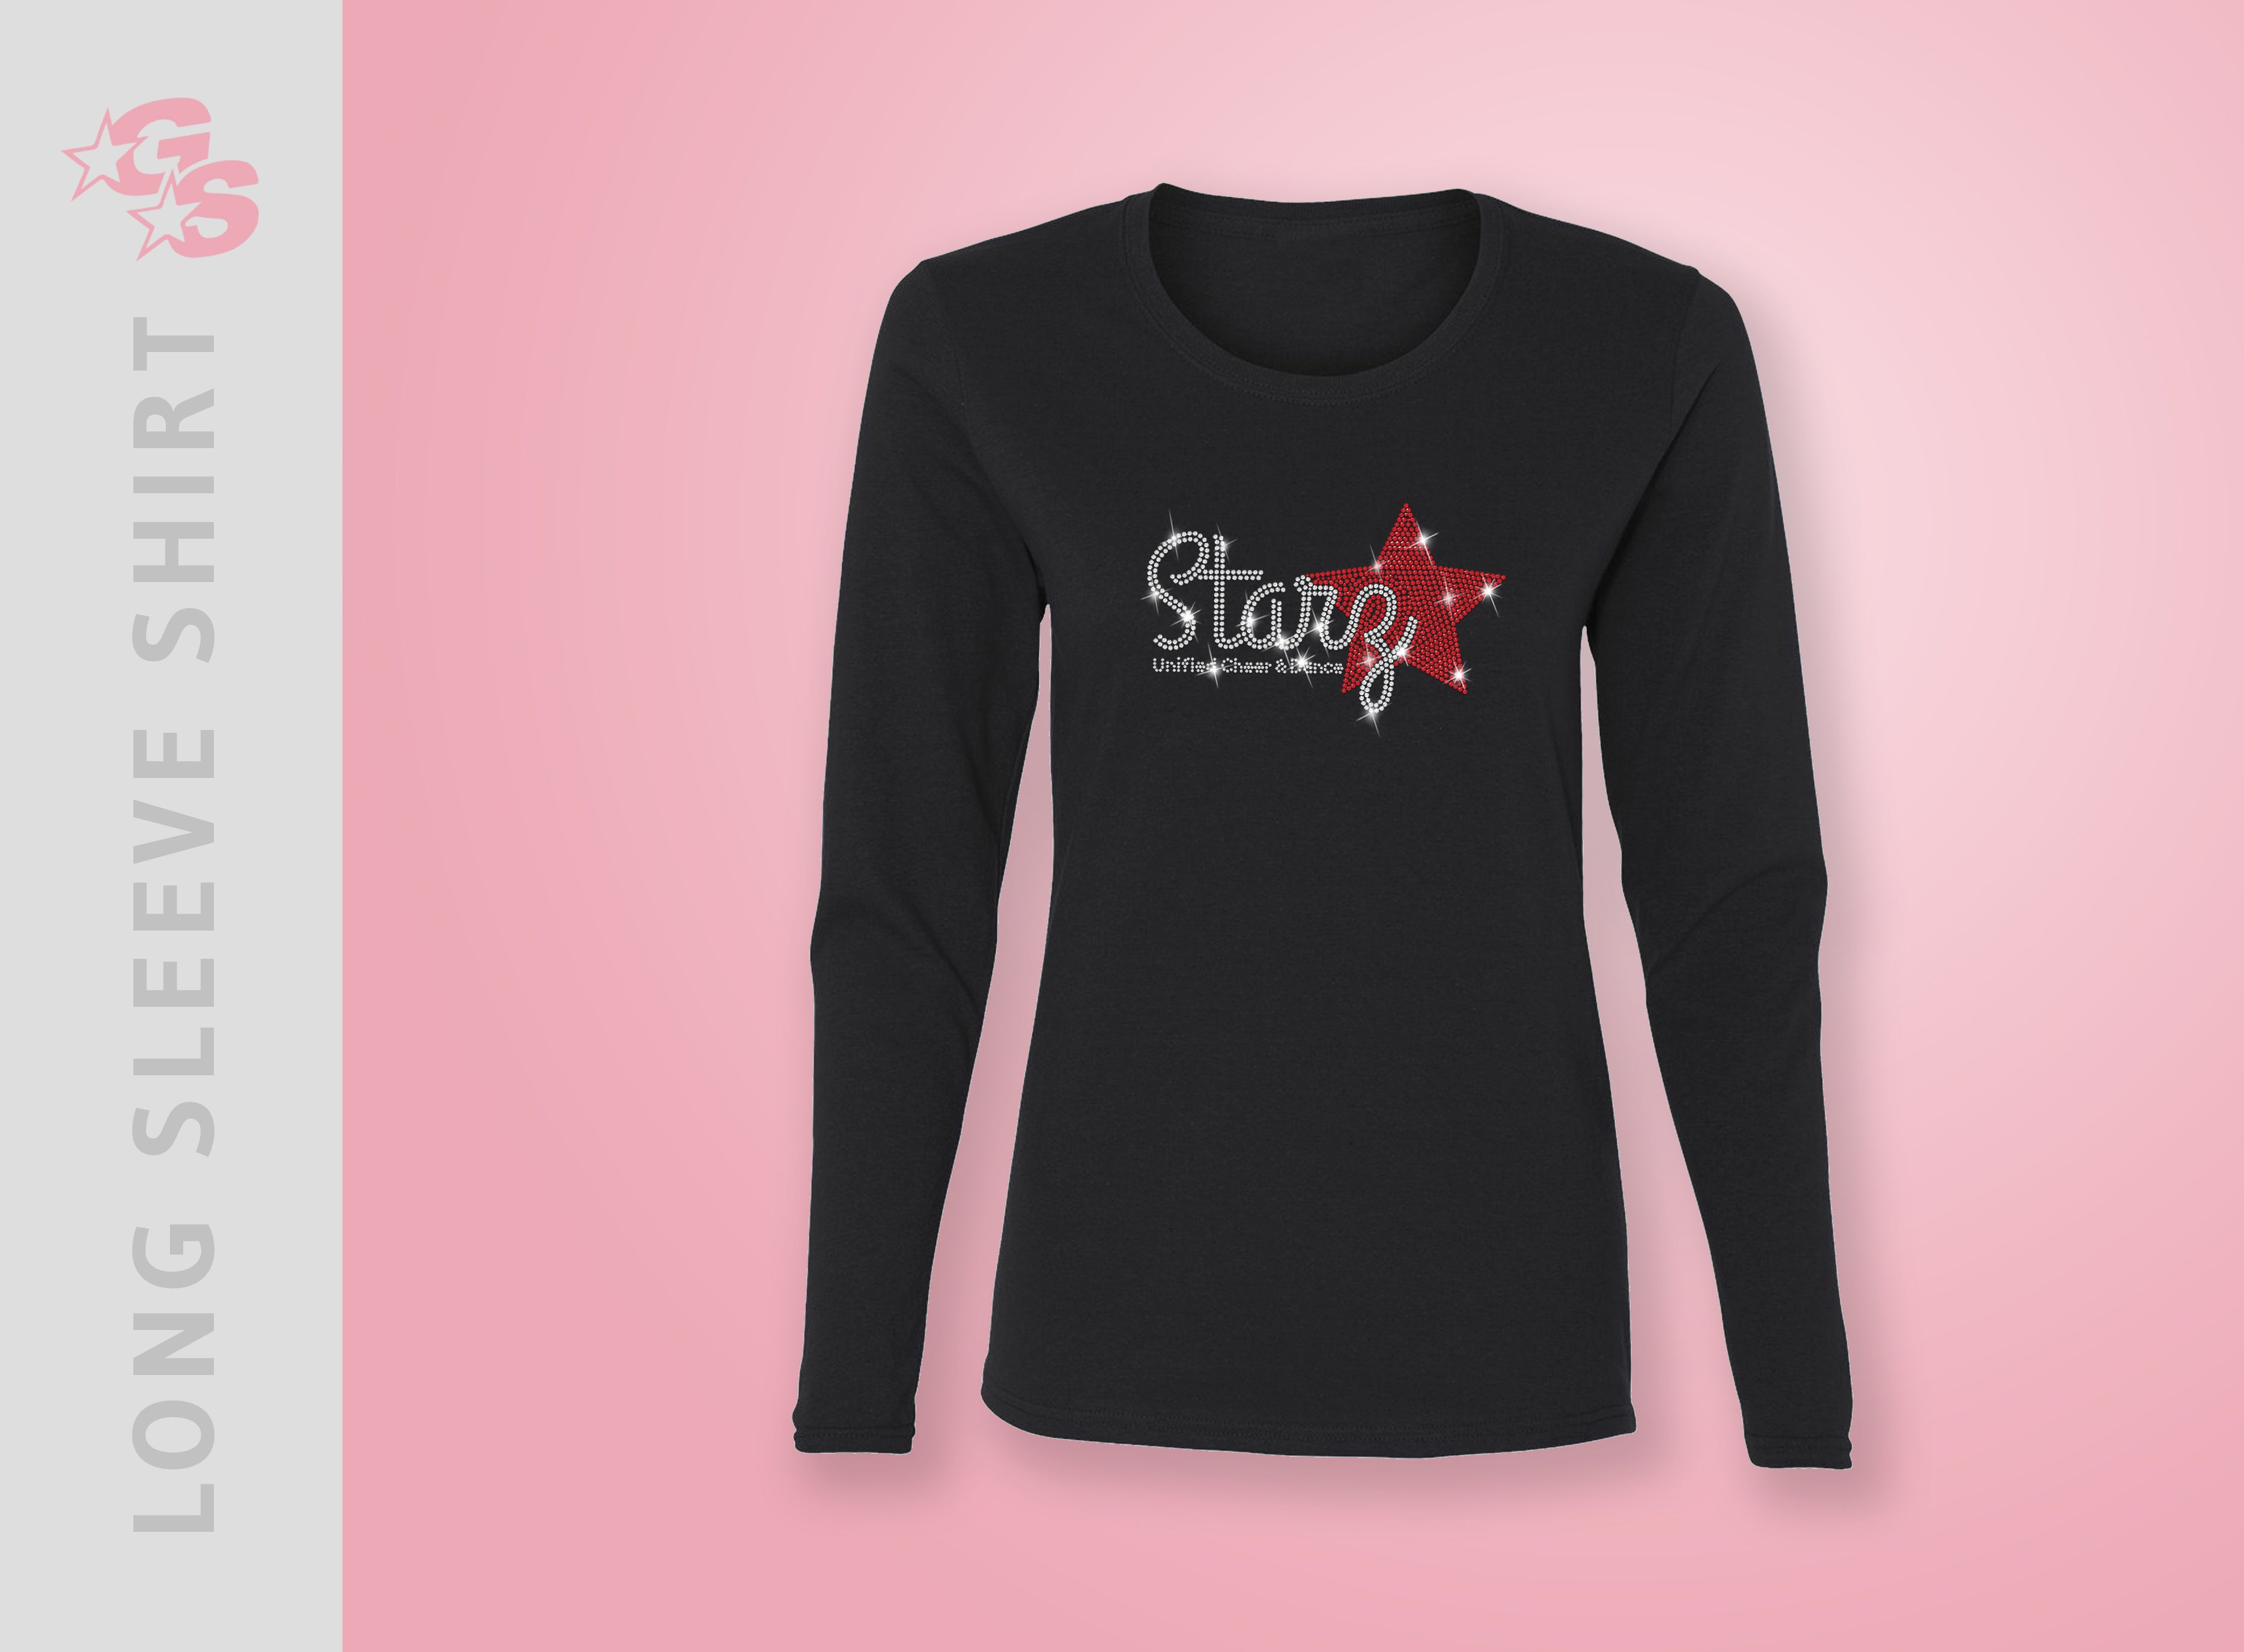 Special Olympic Starz Unified Cheer and Dance Long Sleeve Shirt